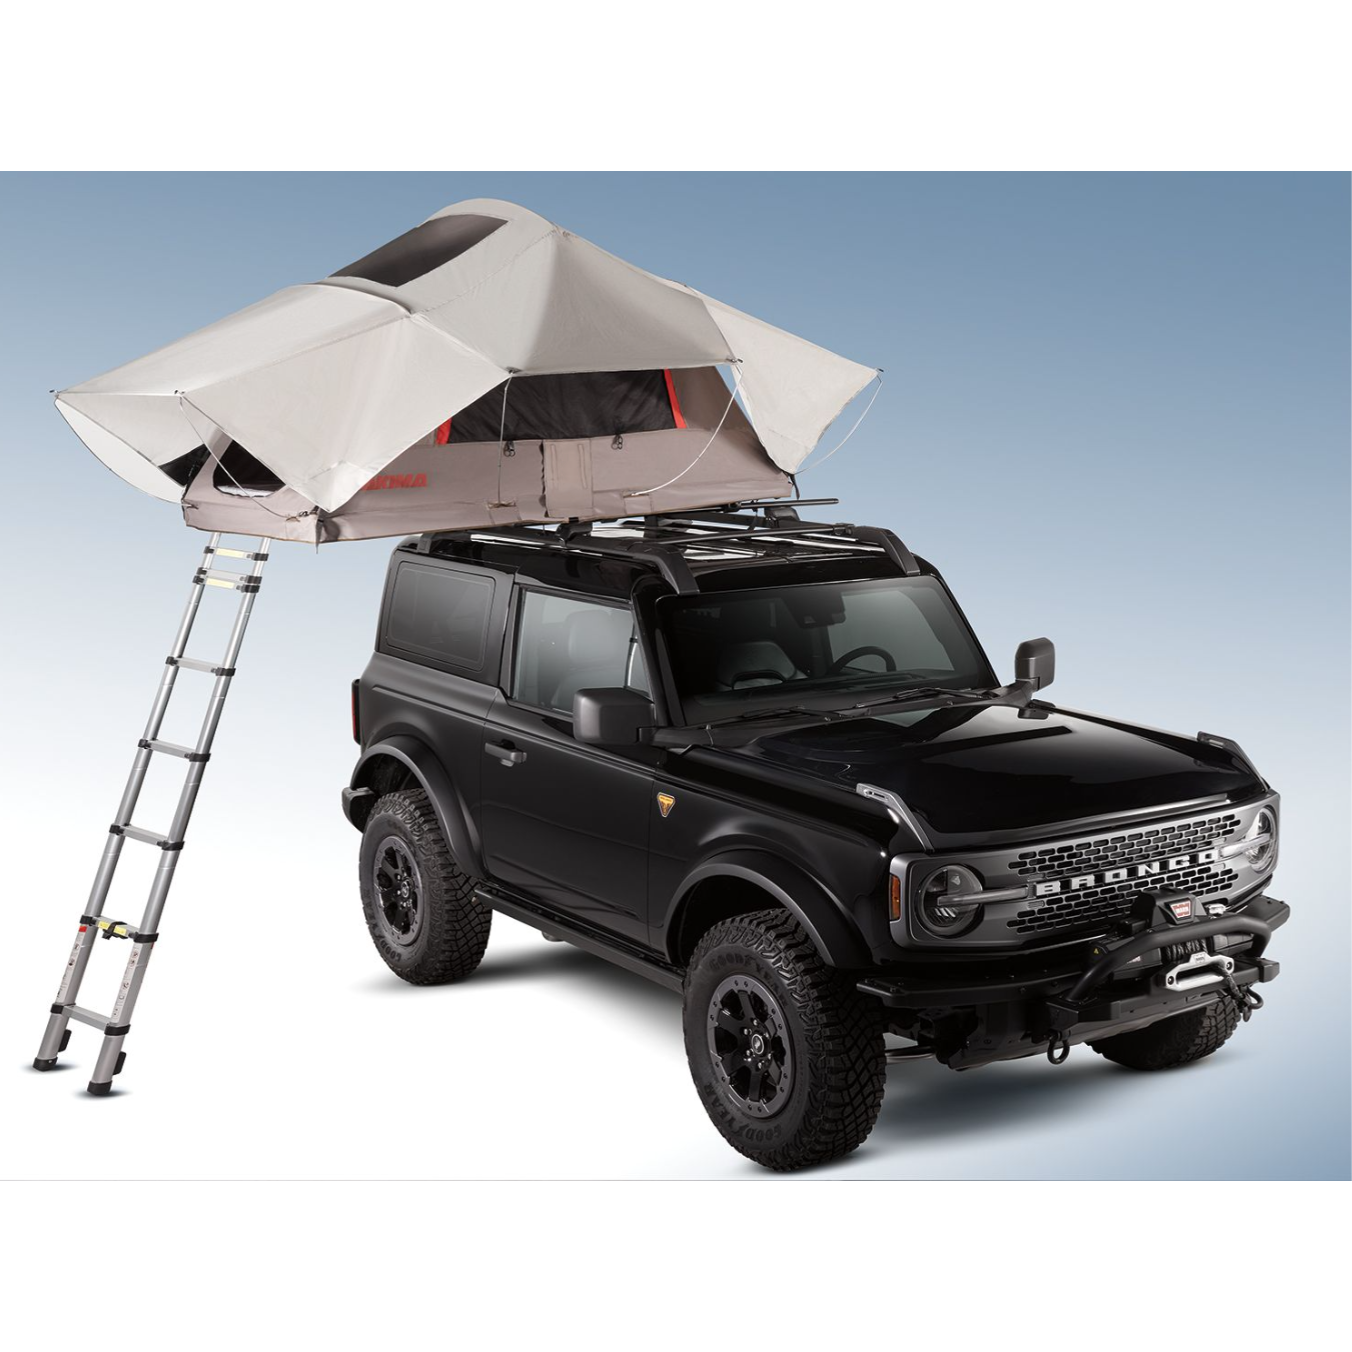 Racks and Carriers by Yakima - 2-Person Heavy duty Tent